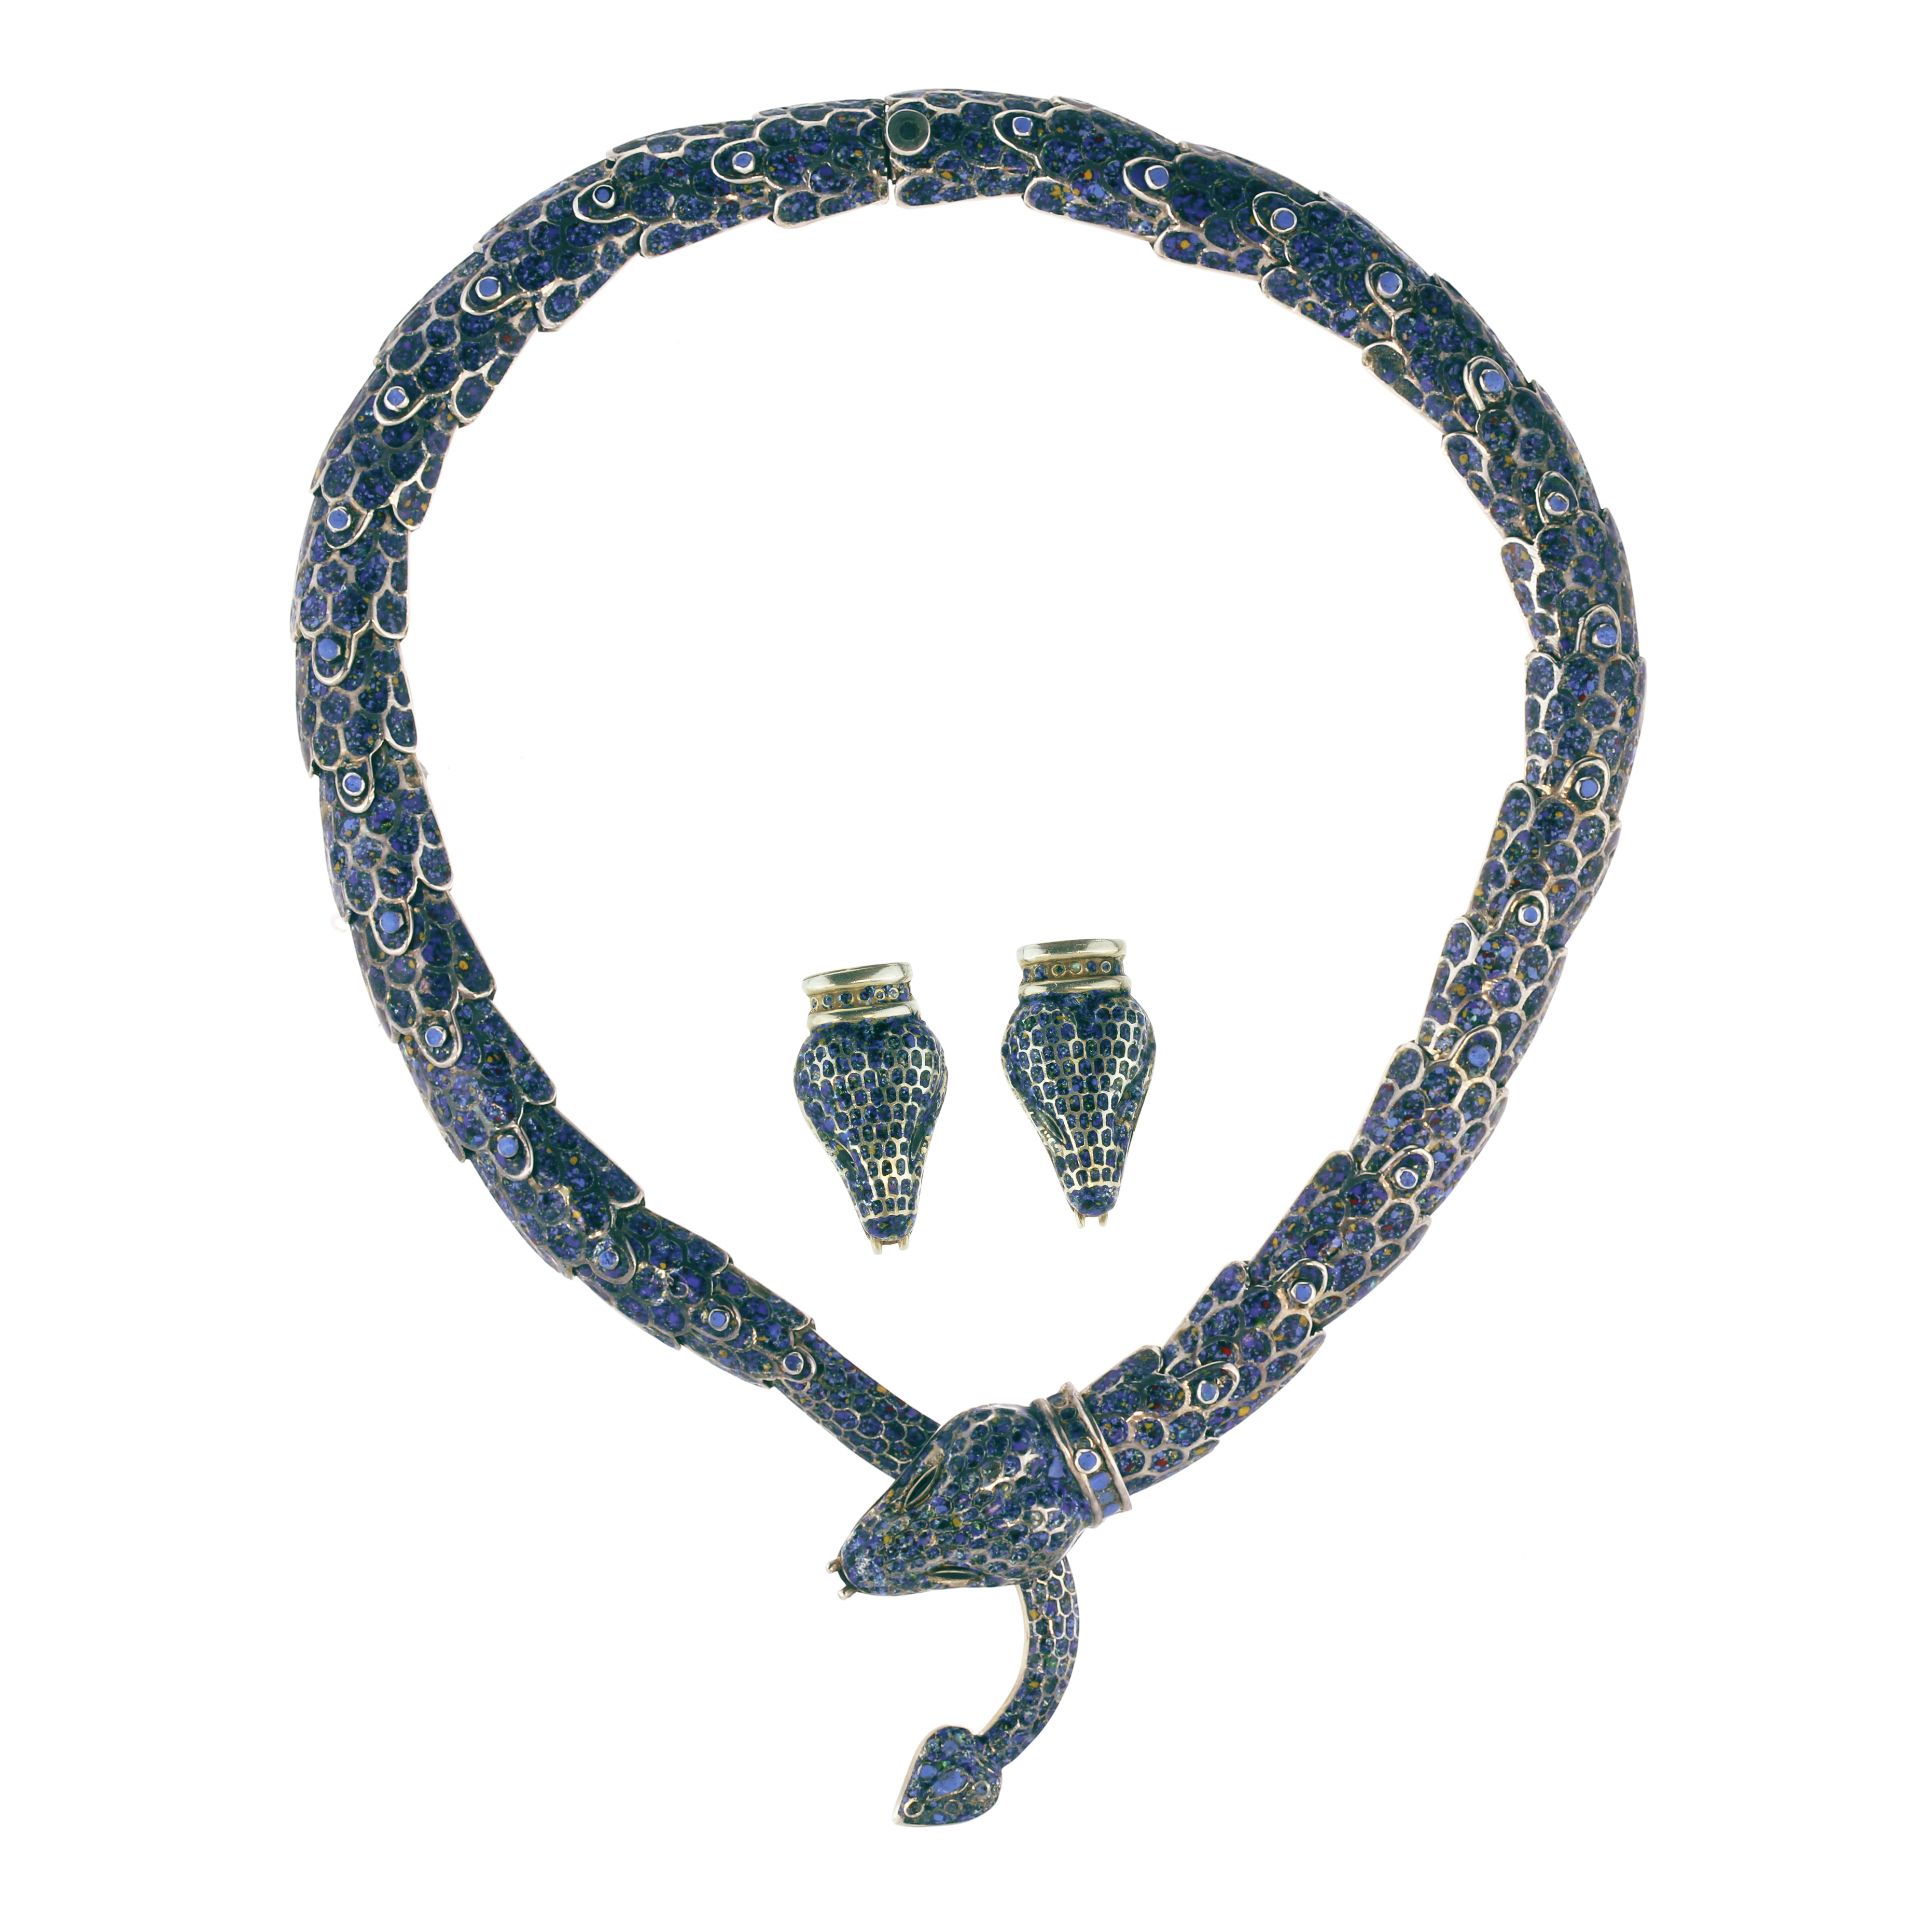 An antique Mexican enamel snake necklace and earrings suite in Sterling Silver the necklace designed